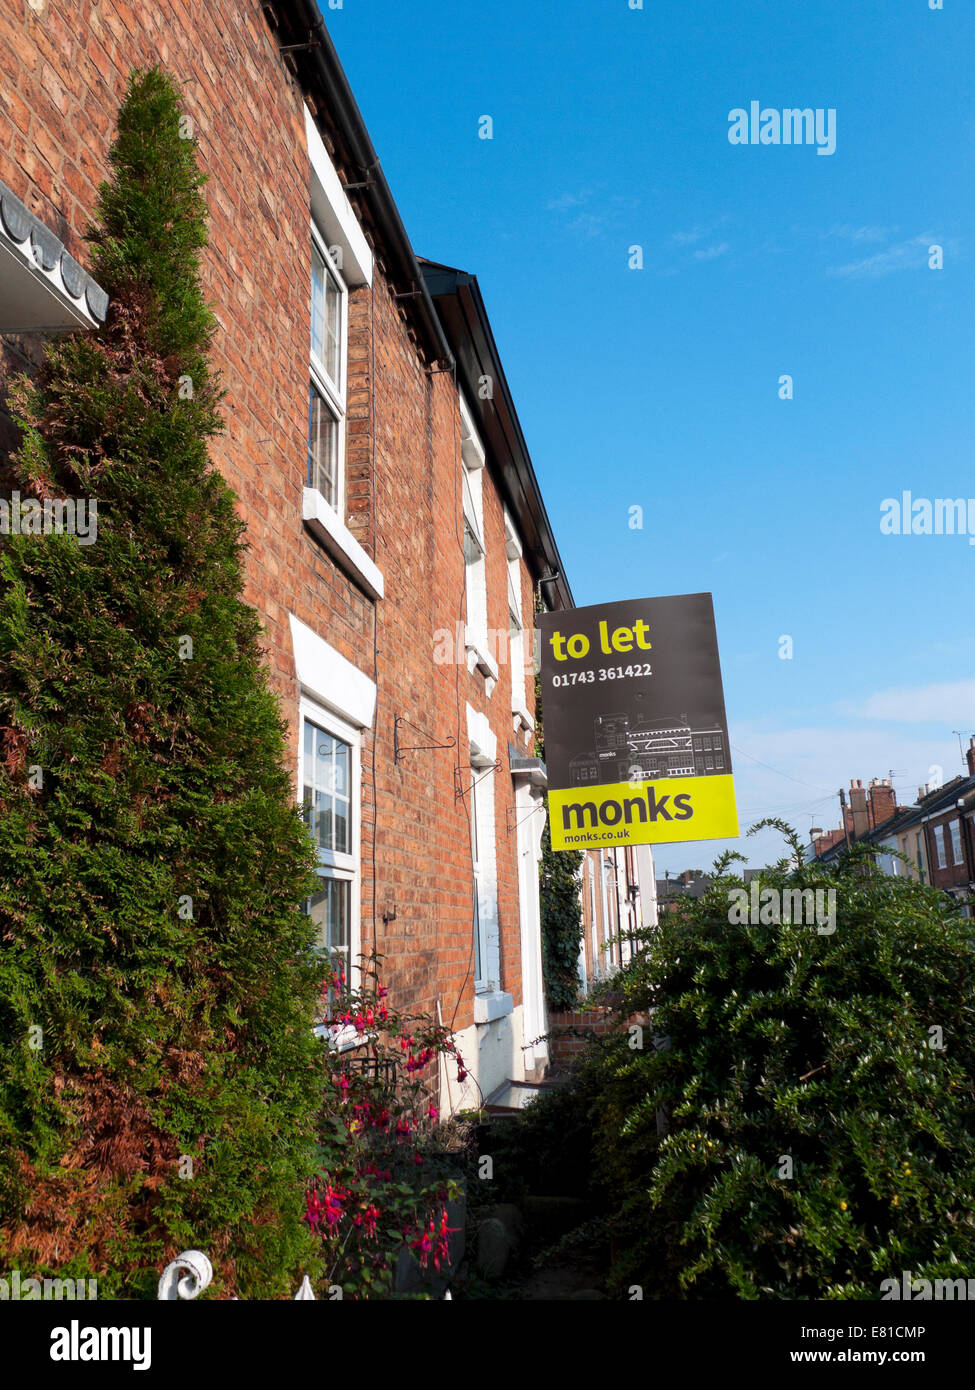 Estate Agent Monks 'To Let' sign on a house in Shrewsbury England, UK  KATHY DEWITT Stock Photo